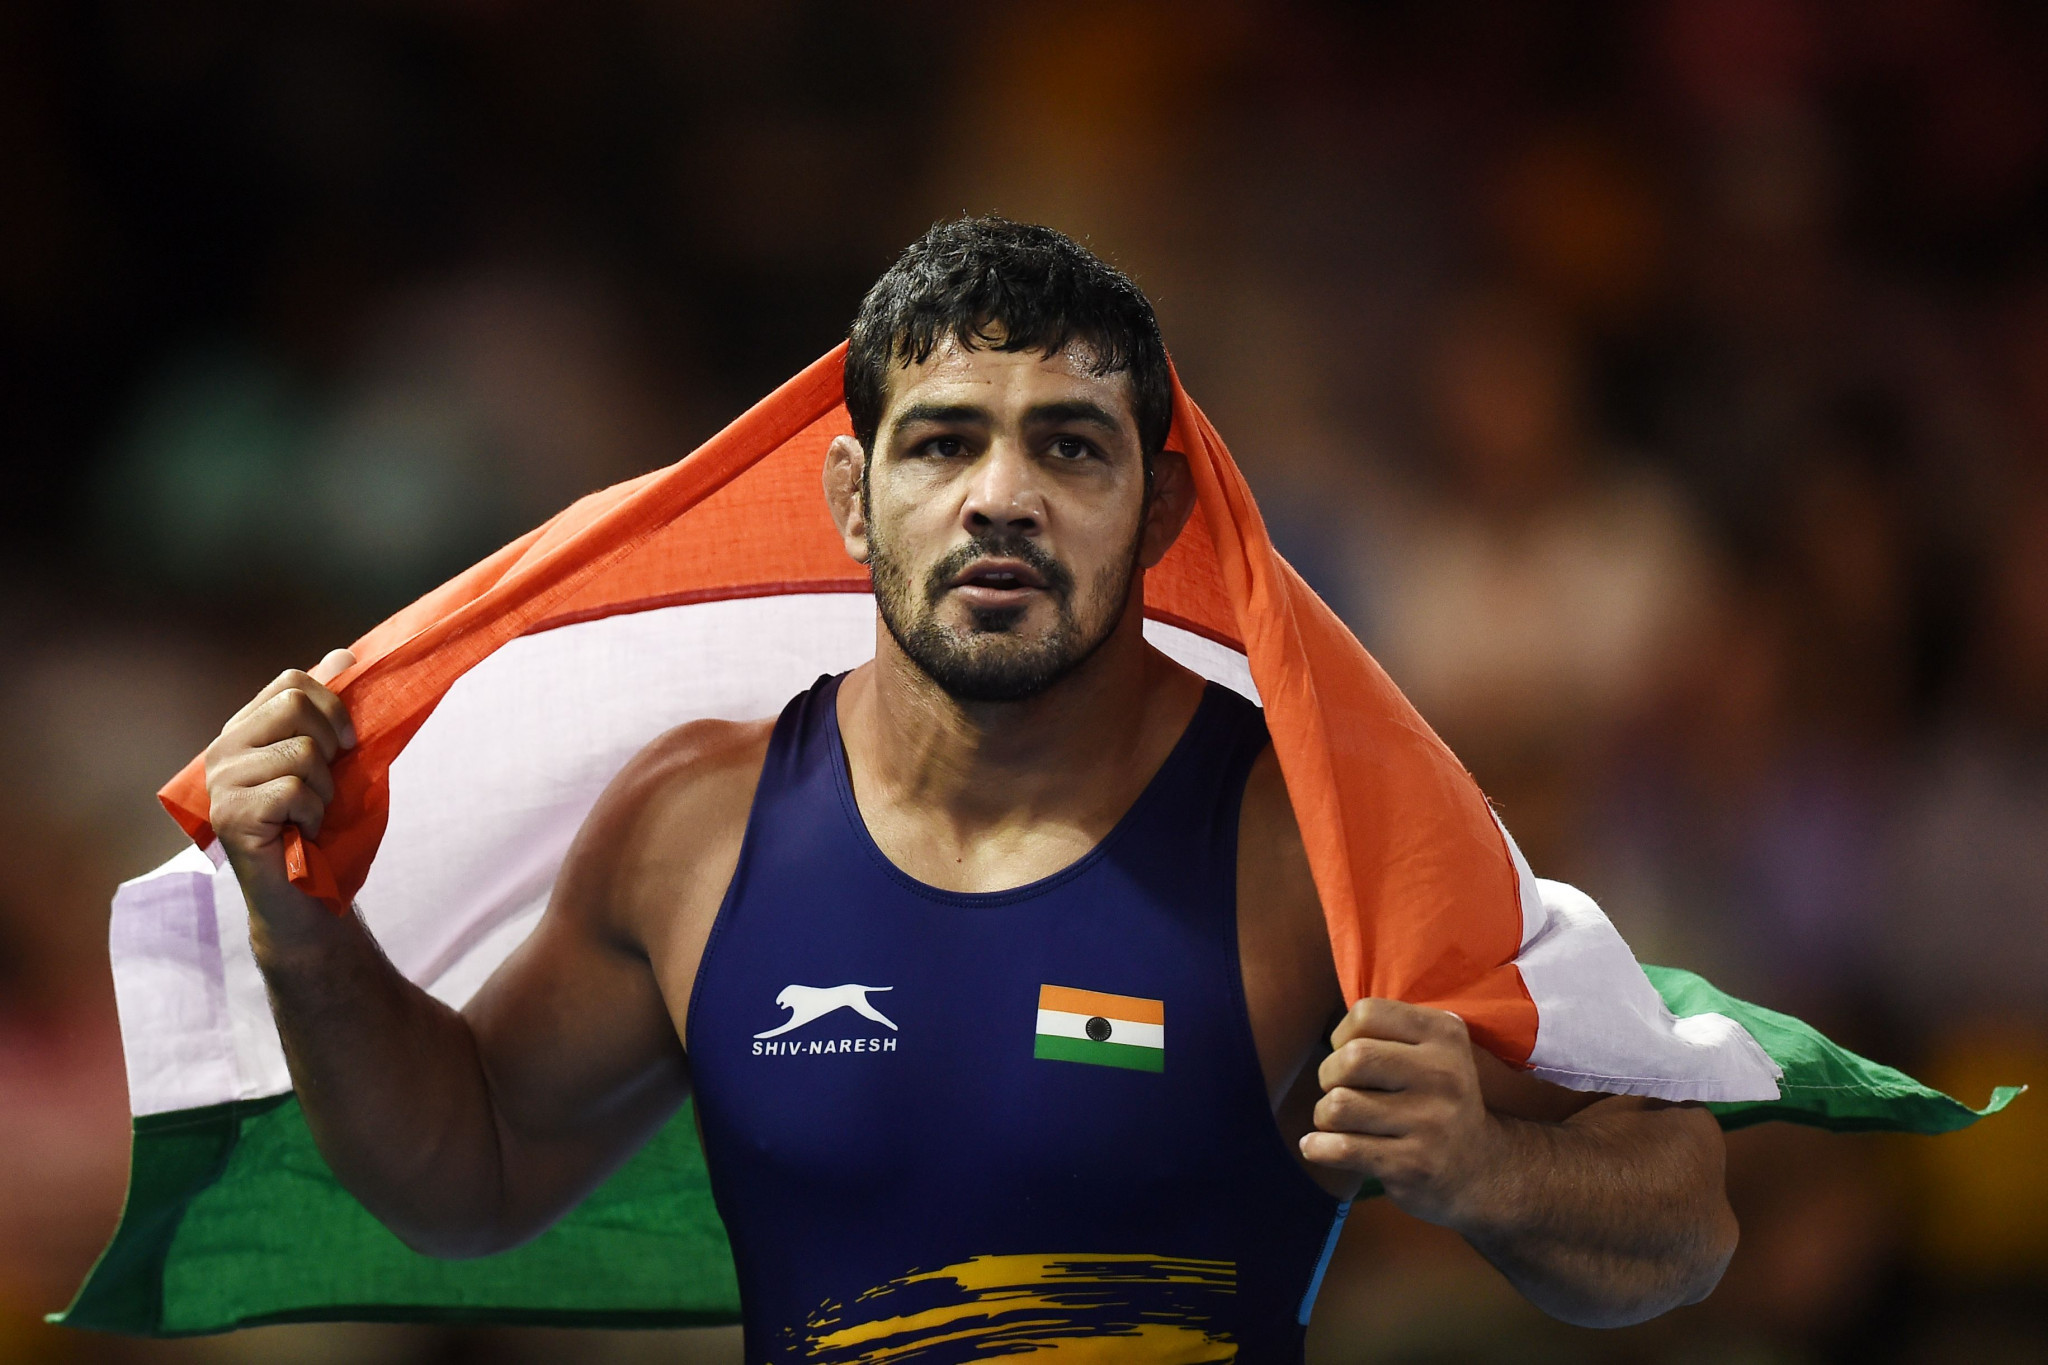 India's Sushil Kumar won the men's 74 kilograms wrestling event at Gold Coast 2018, securing the third Commonwealth Games gold medal of his career ©Getty Images